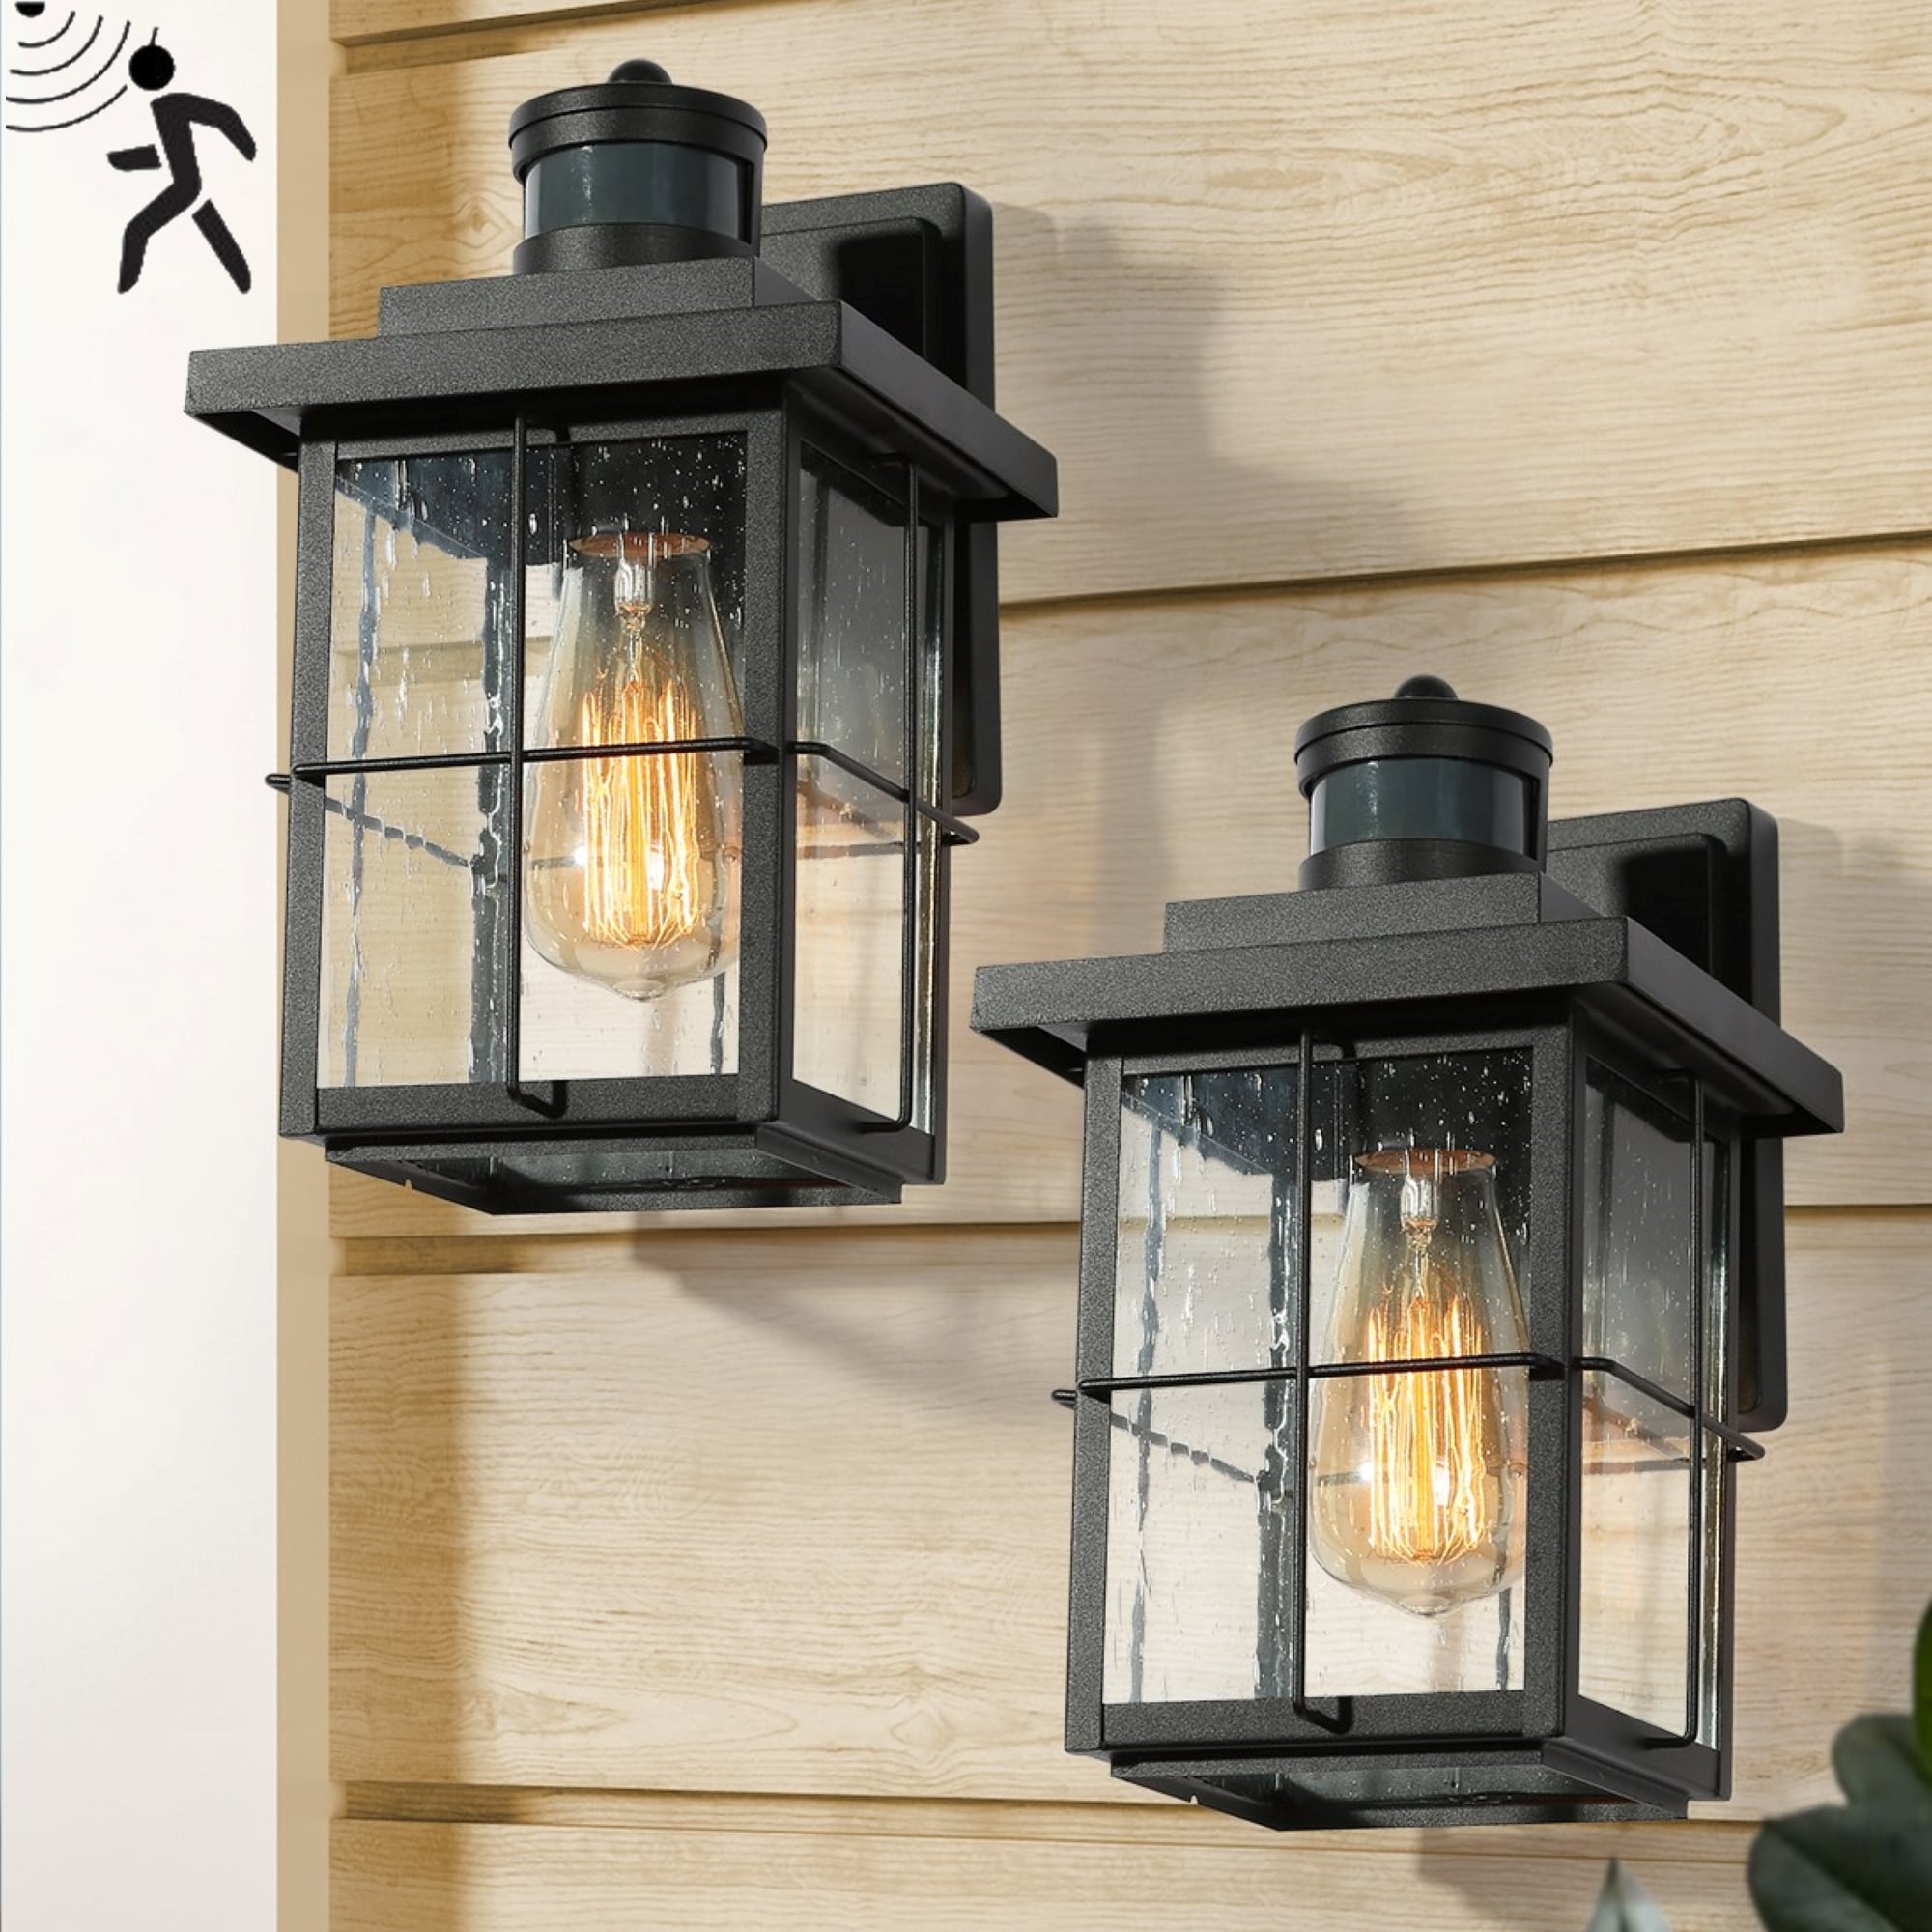 Pack Of 2 Elegant Outdoor Lanterns With Smart Photocell Sensors 